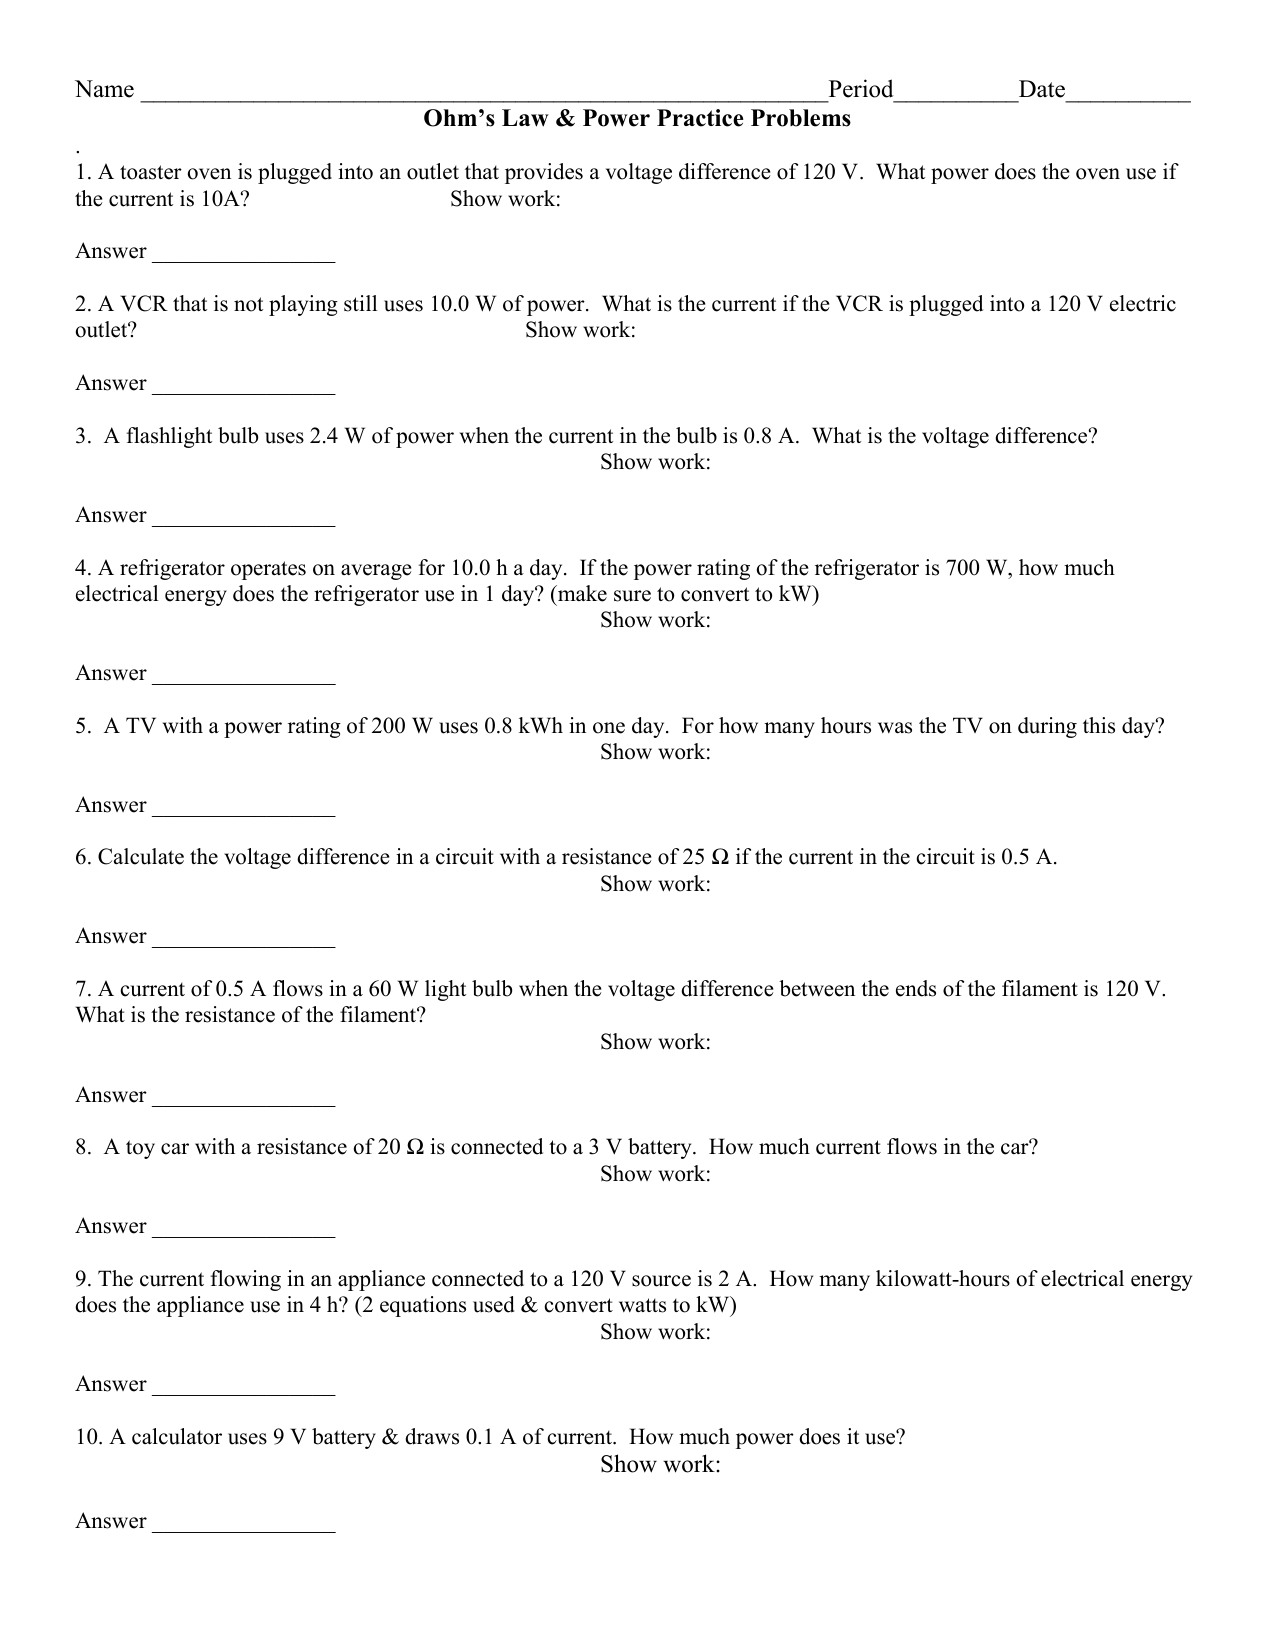 ohms-law-worksheet-answers-escolagersonalvesgui